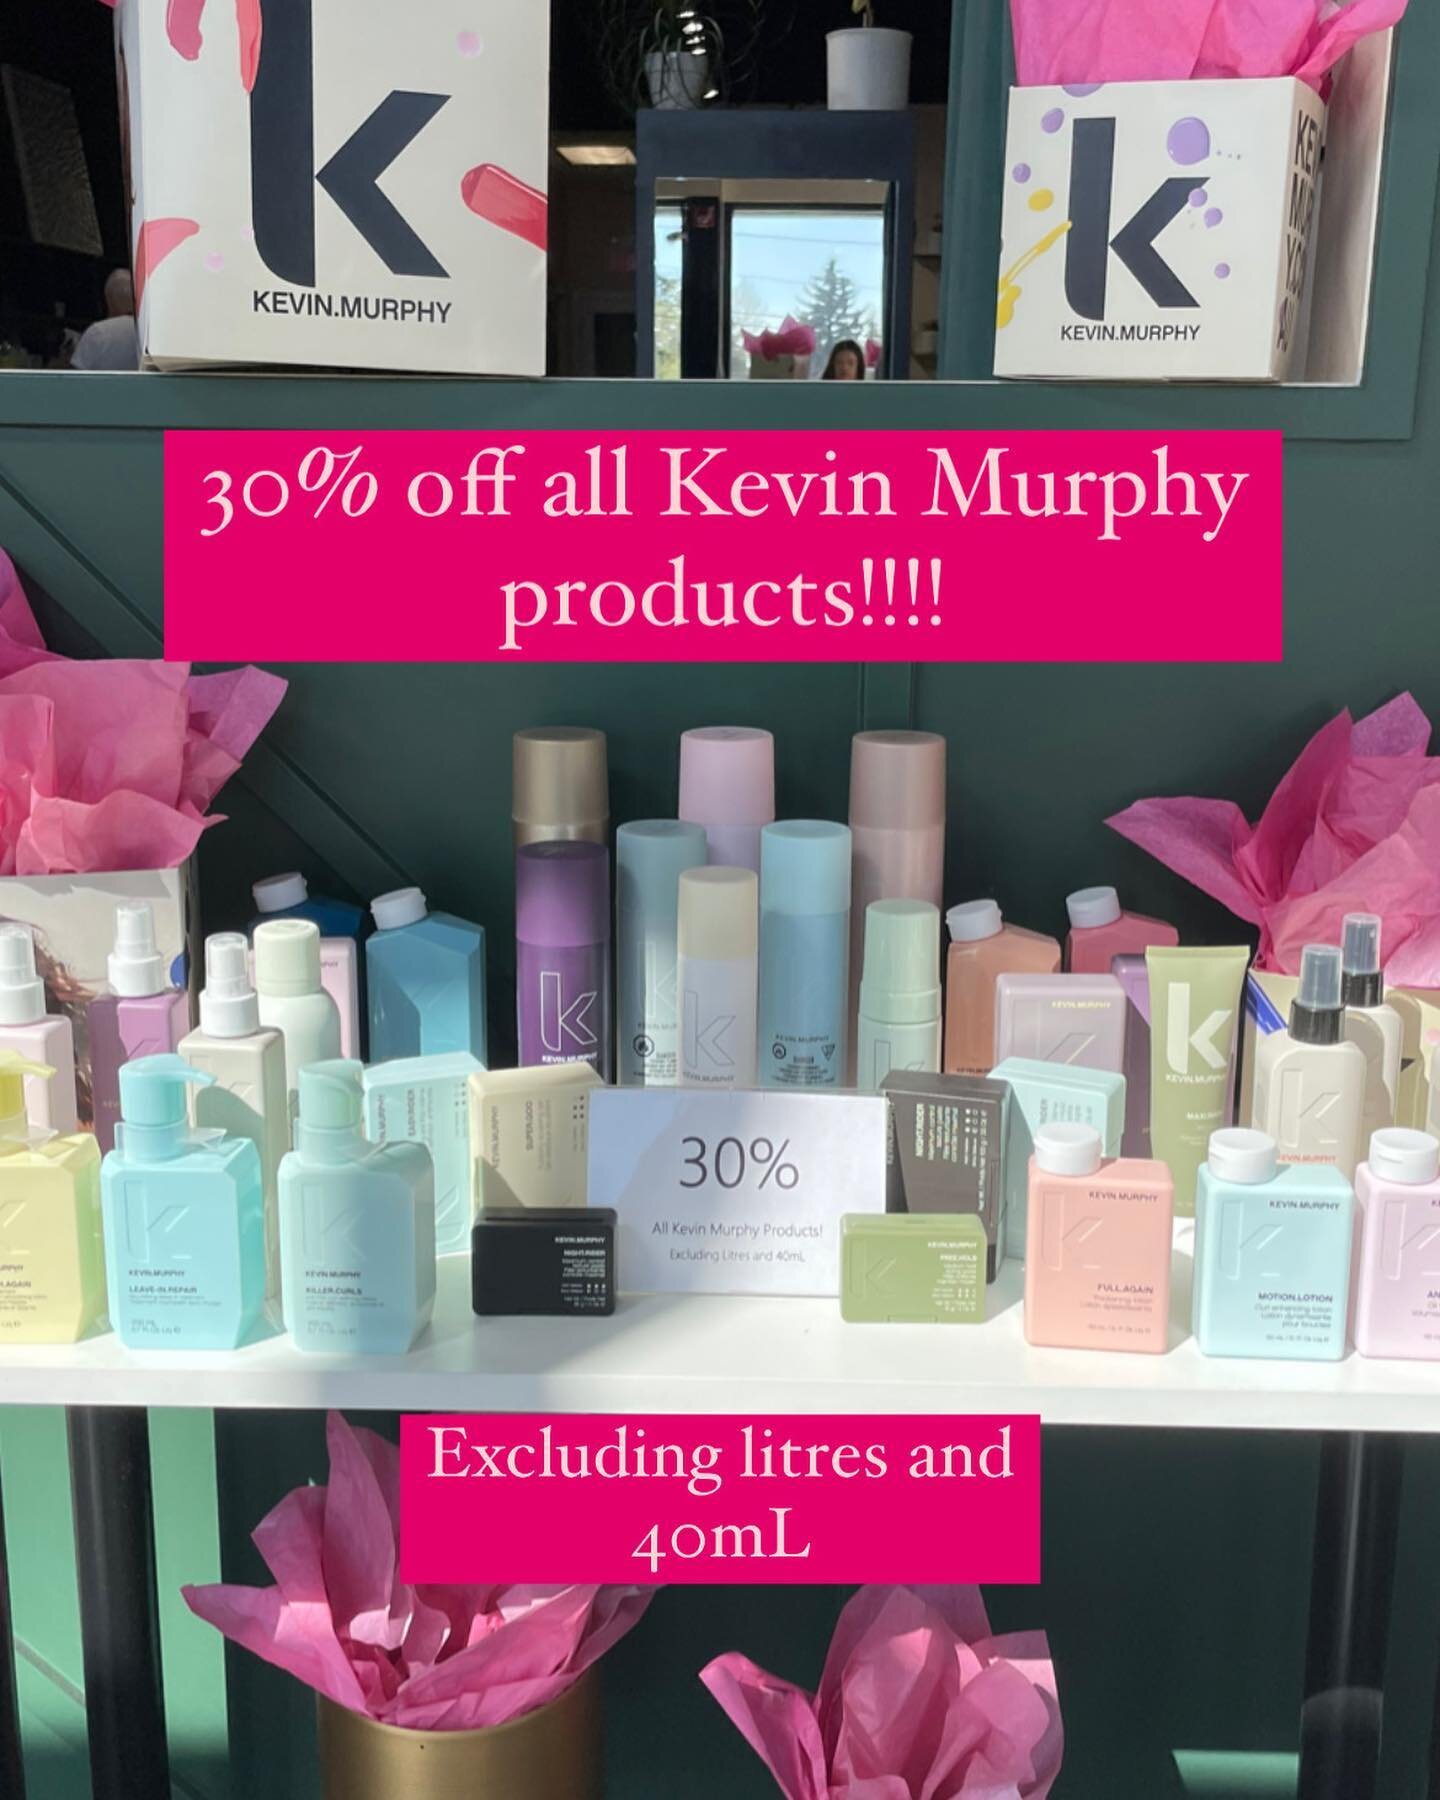 Grab your fav Kevin Murphy products while supplies last! 🥰 Alta Moda hair spring sale on all Kevin Murphy products excluding Litres! Best deal of the year 😊😎 #yeghair